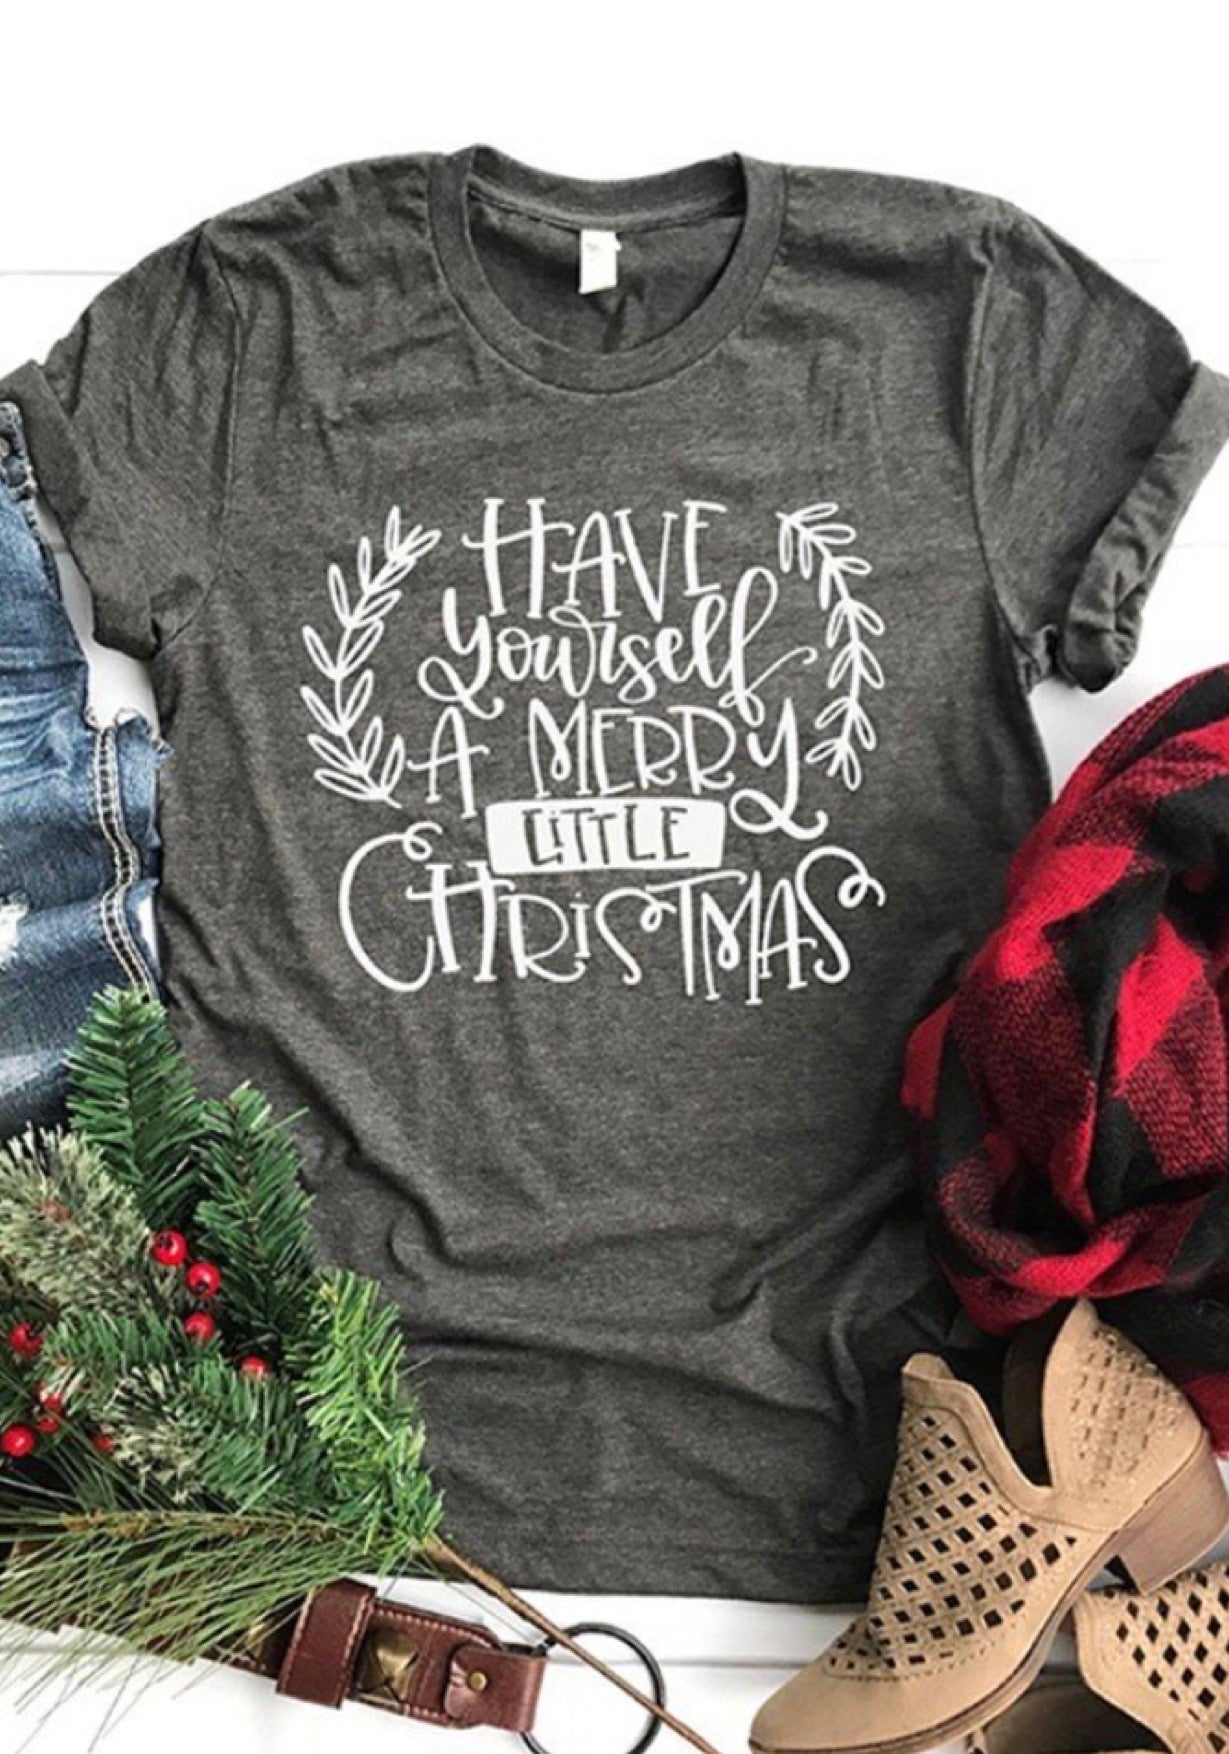 Have Yourself a Merry little Christmas Tee